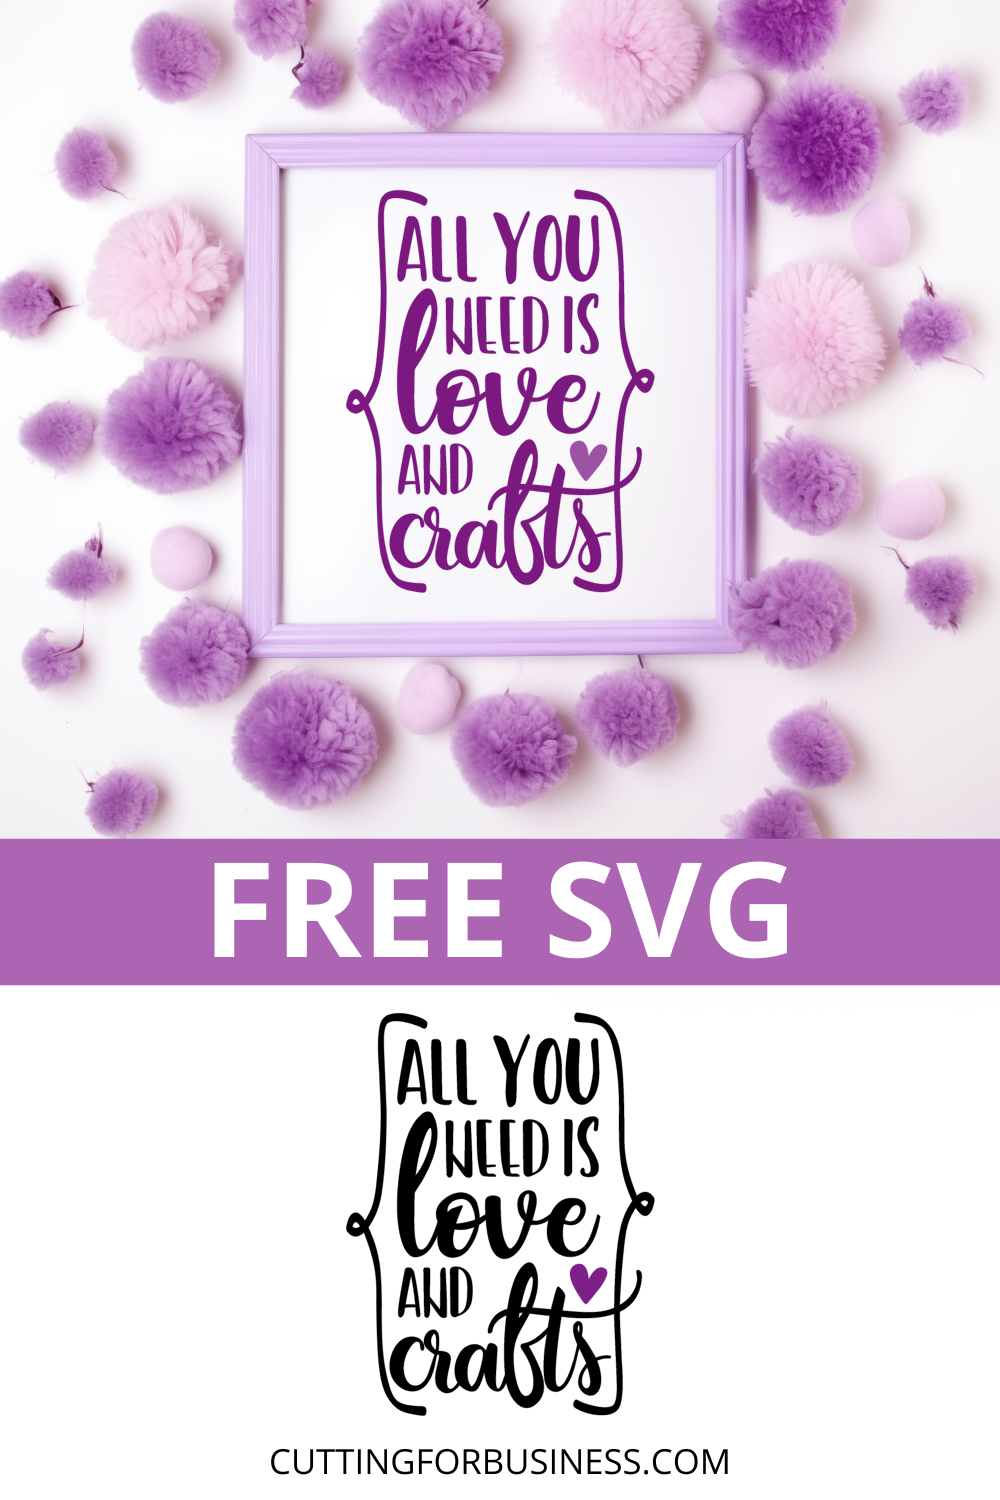 Free SVG - All You Need Is Love and Crafts - cuttingforbusiness.com